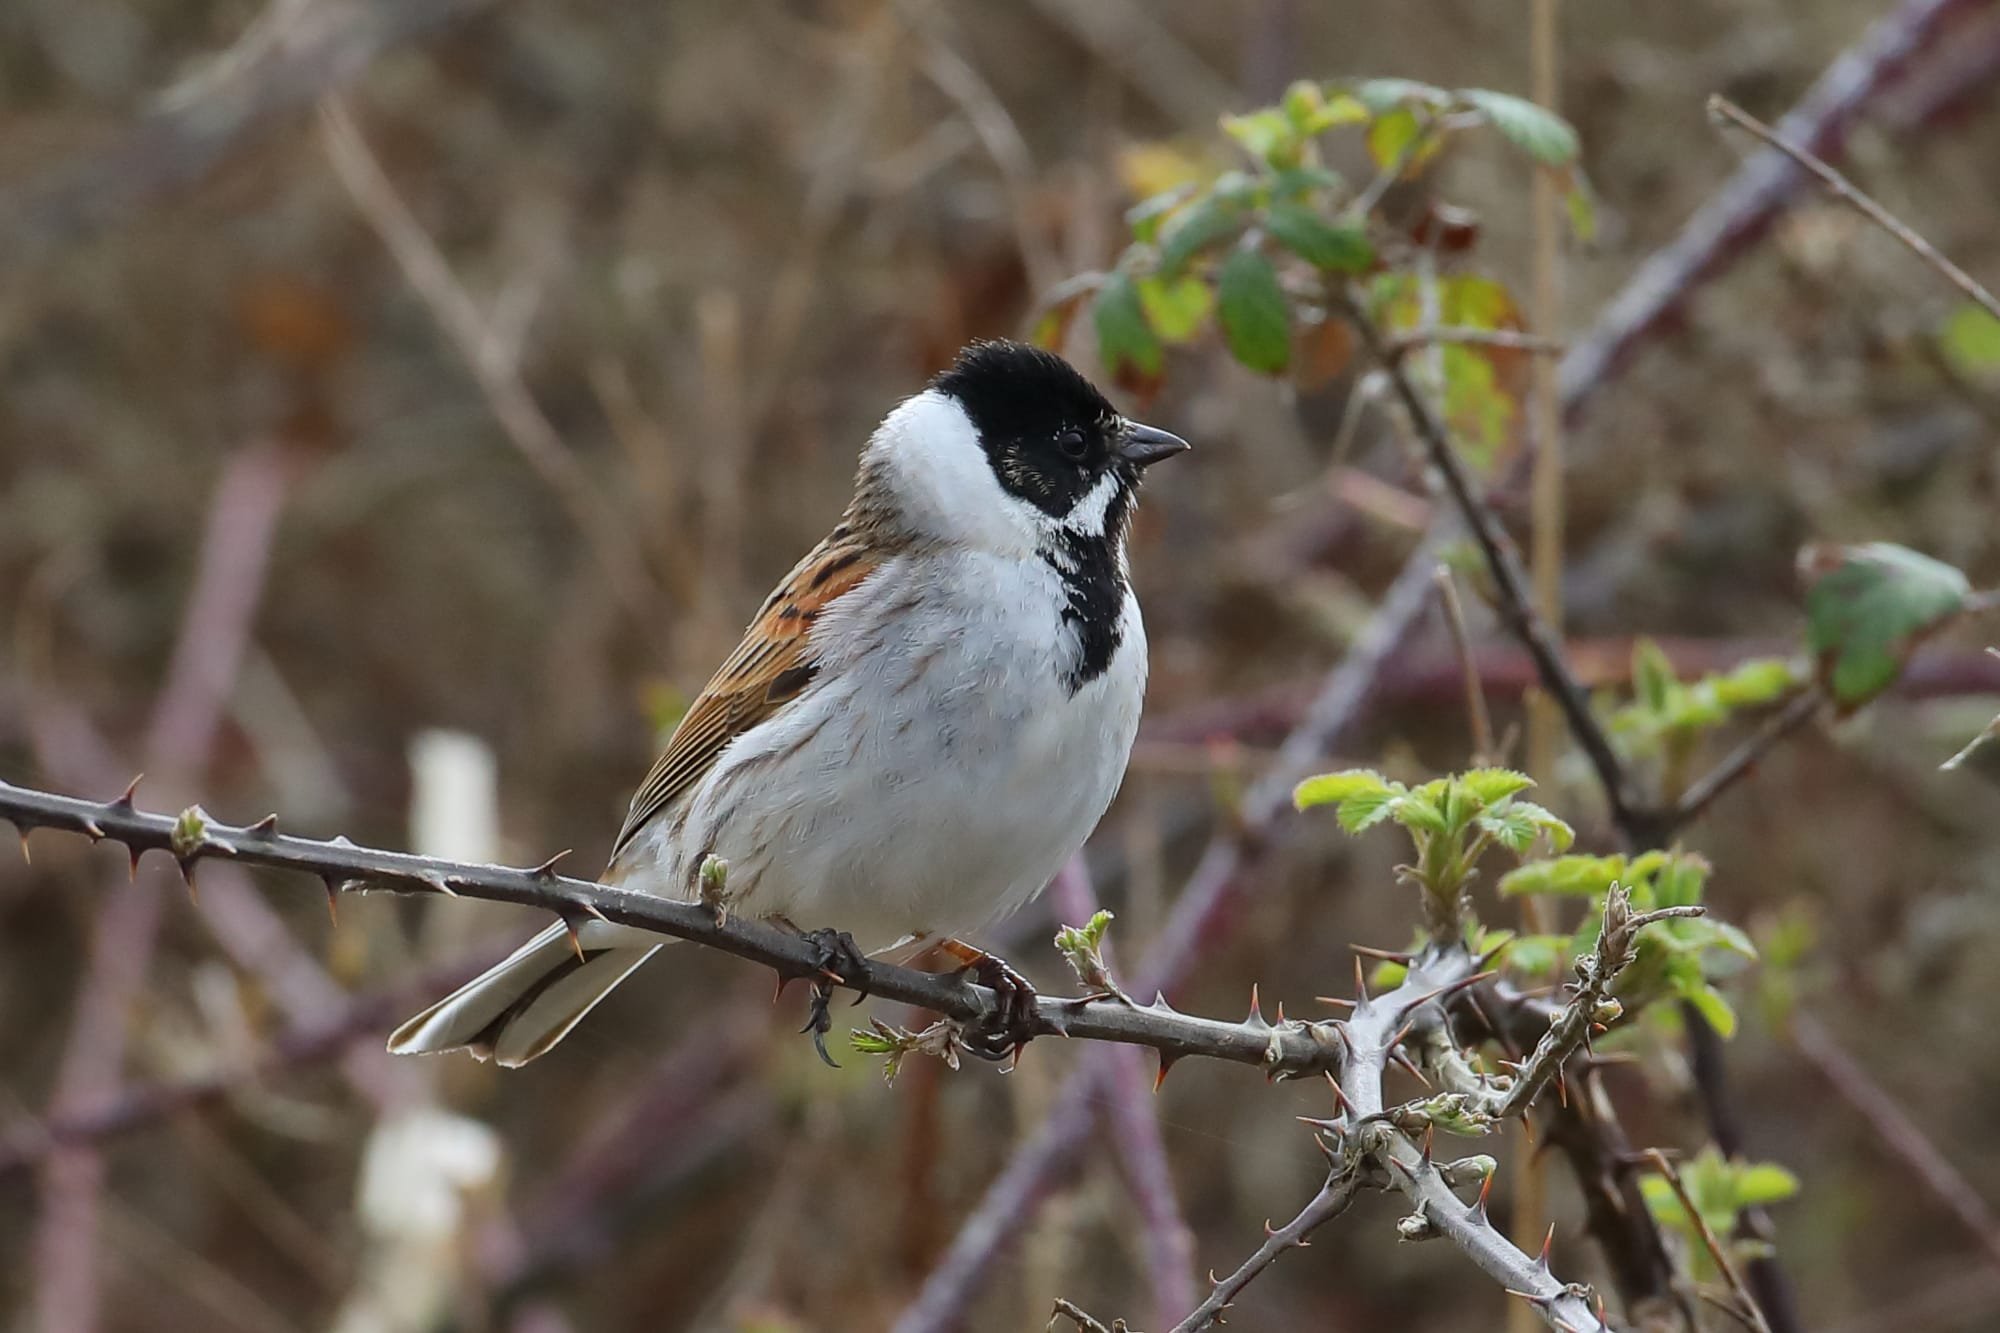 Reed Bunting